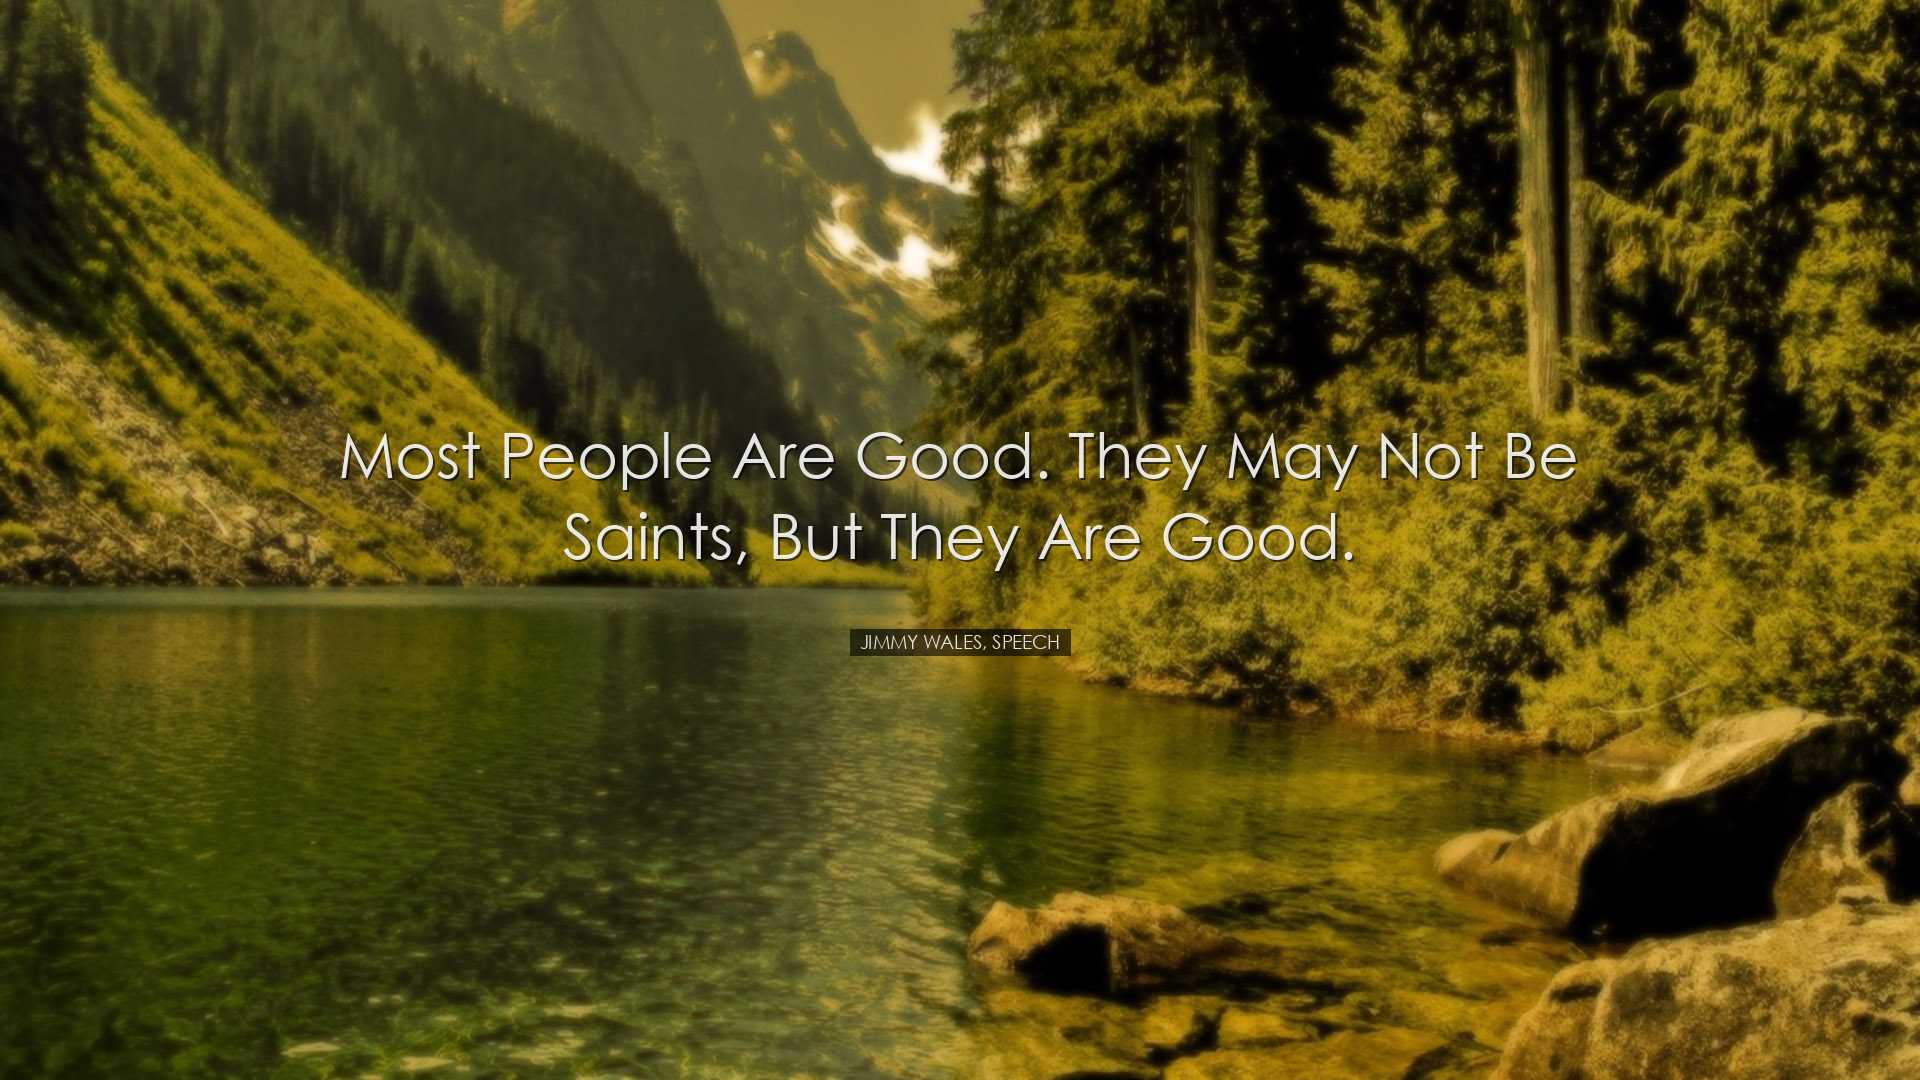 Most people are good. They may not be saints, but they are good. -